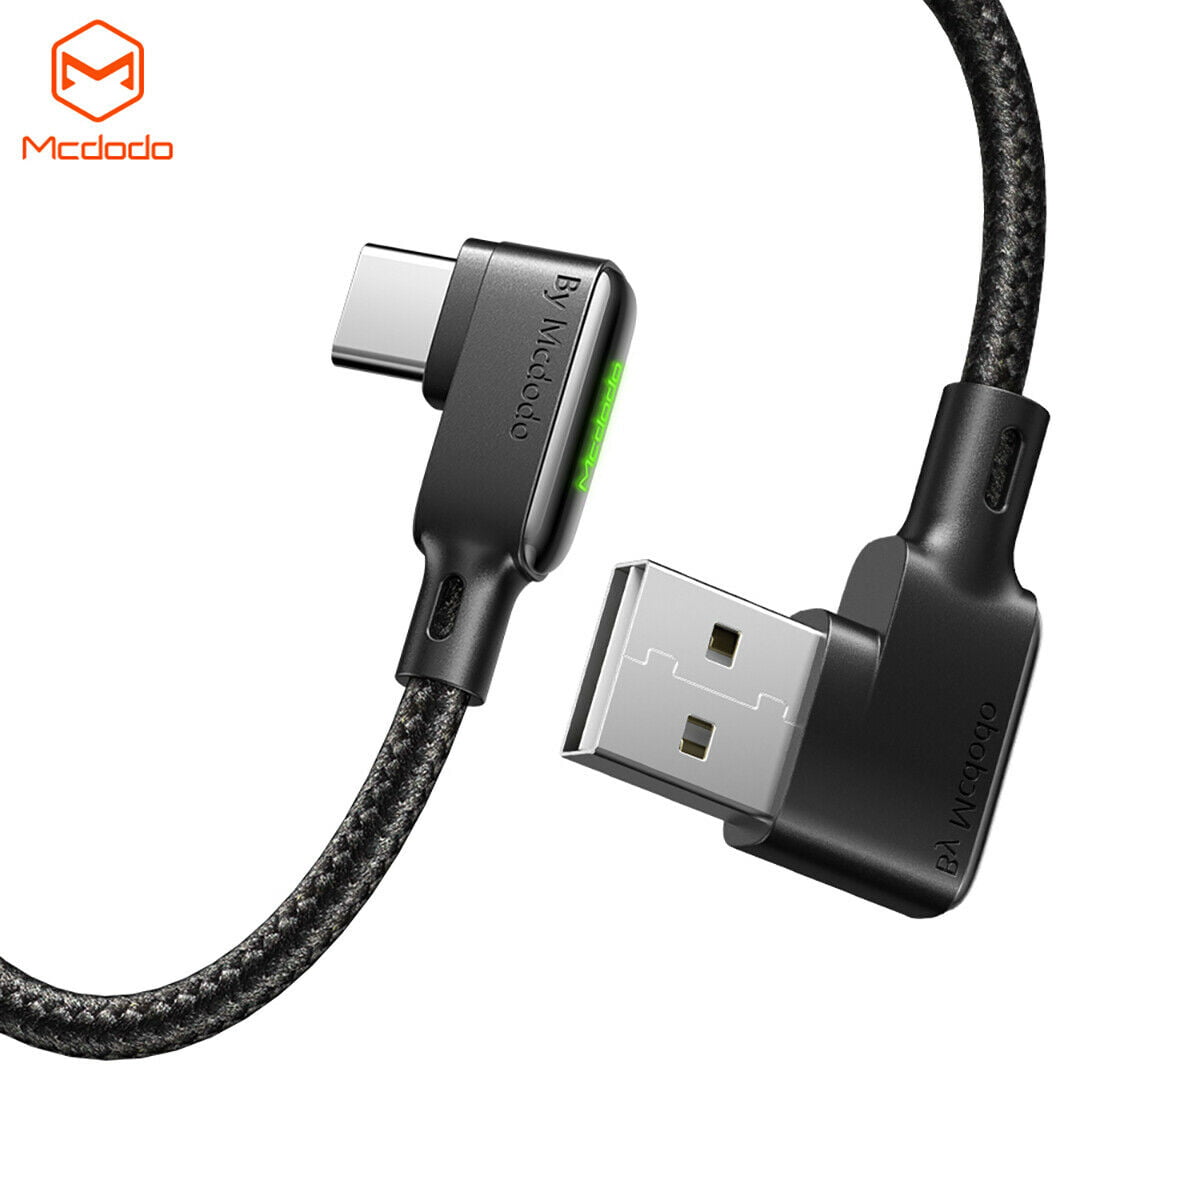 Charging Cable Round USB Data Cable Can Be Charged and Data Transmission Synchronous Fast Charging Cable-Hippie Square